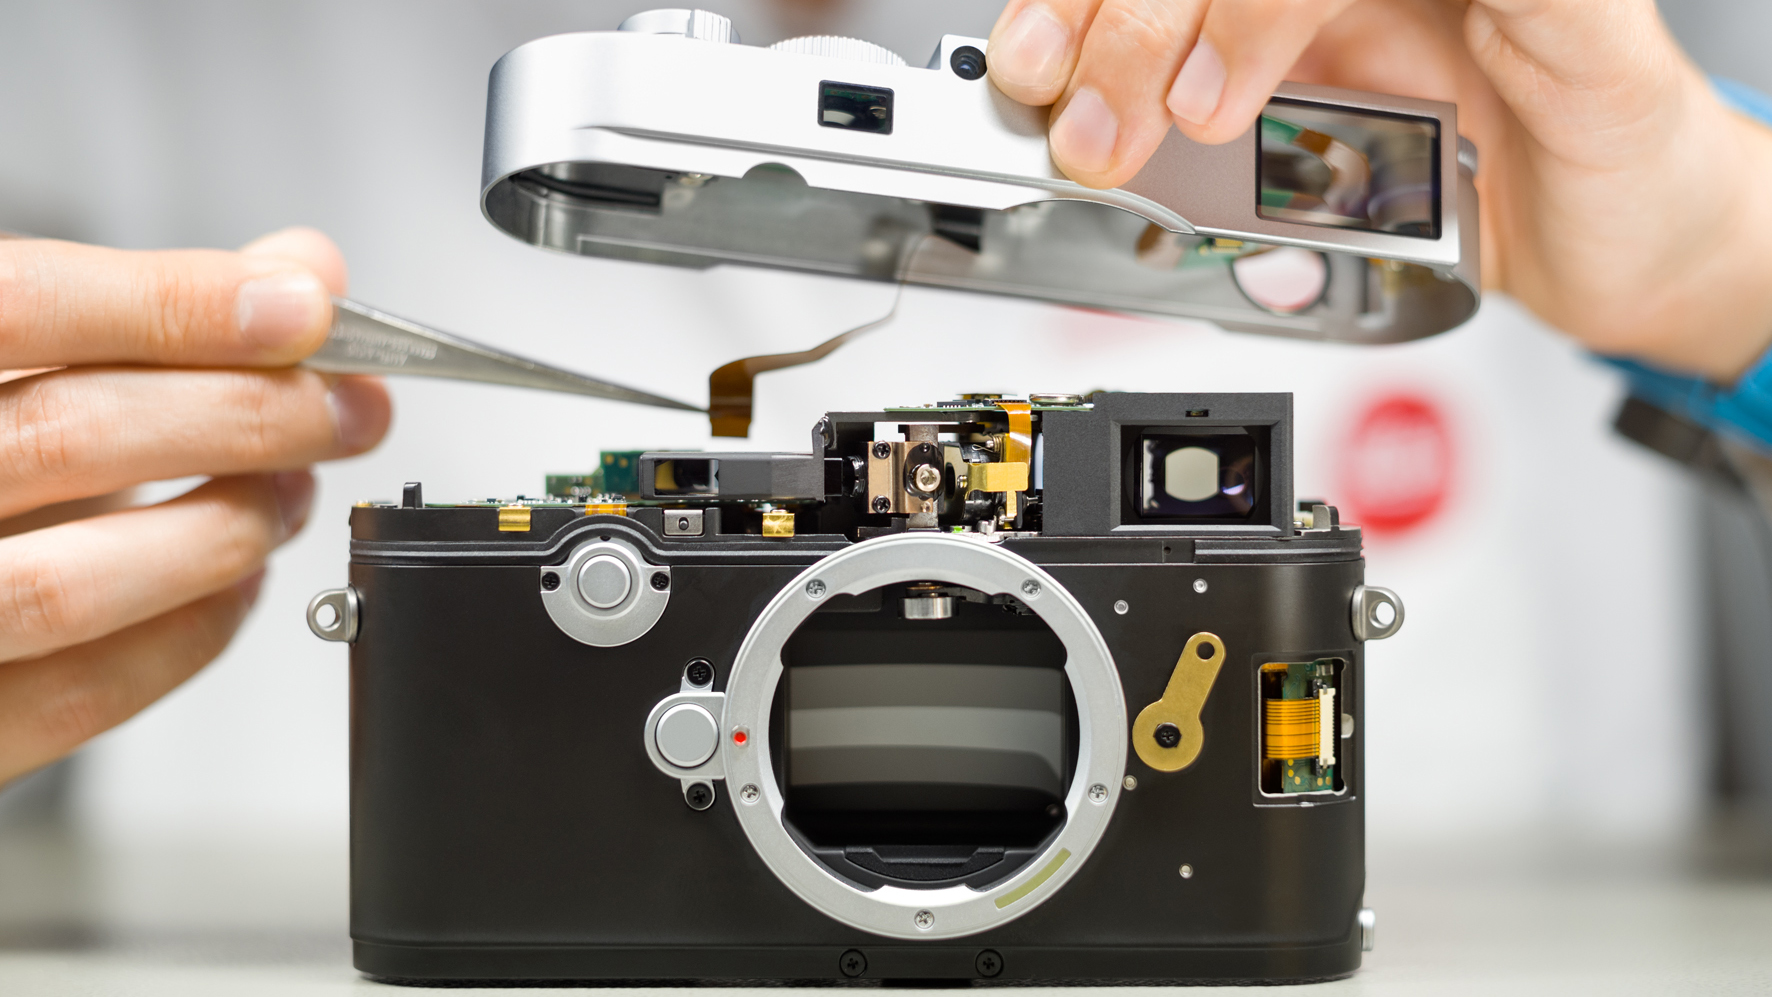 The Leica M11 is being made with the top plate removed